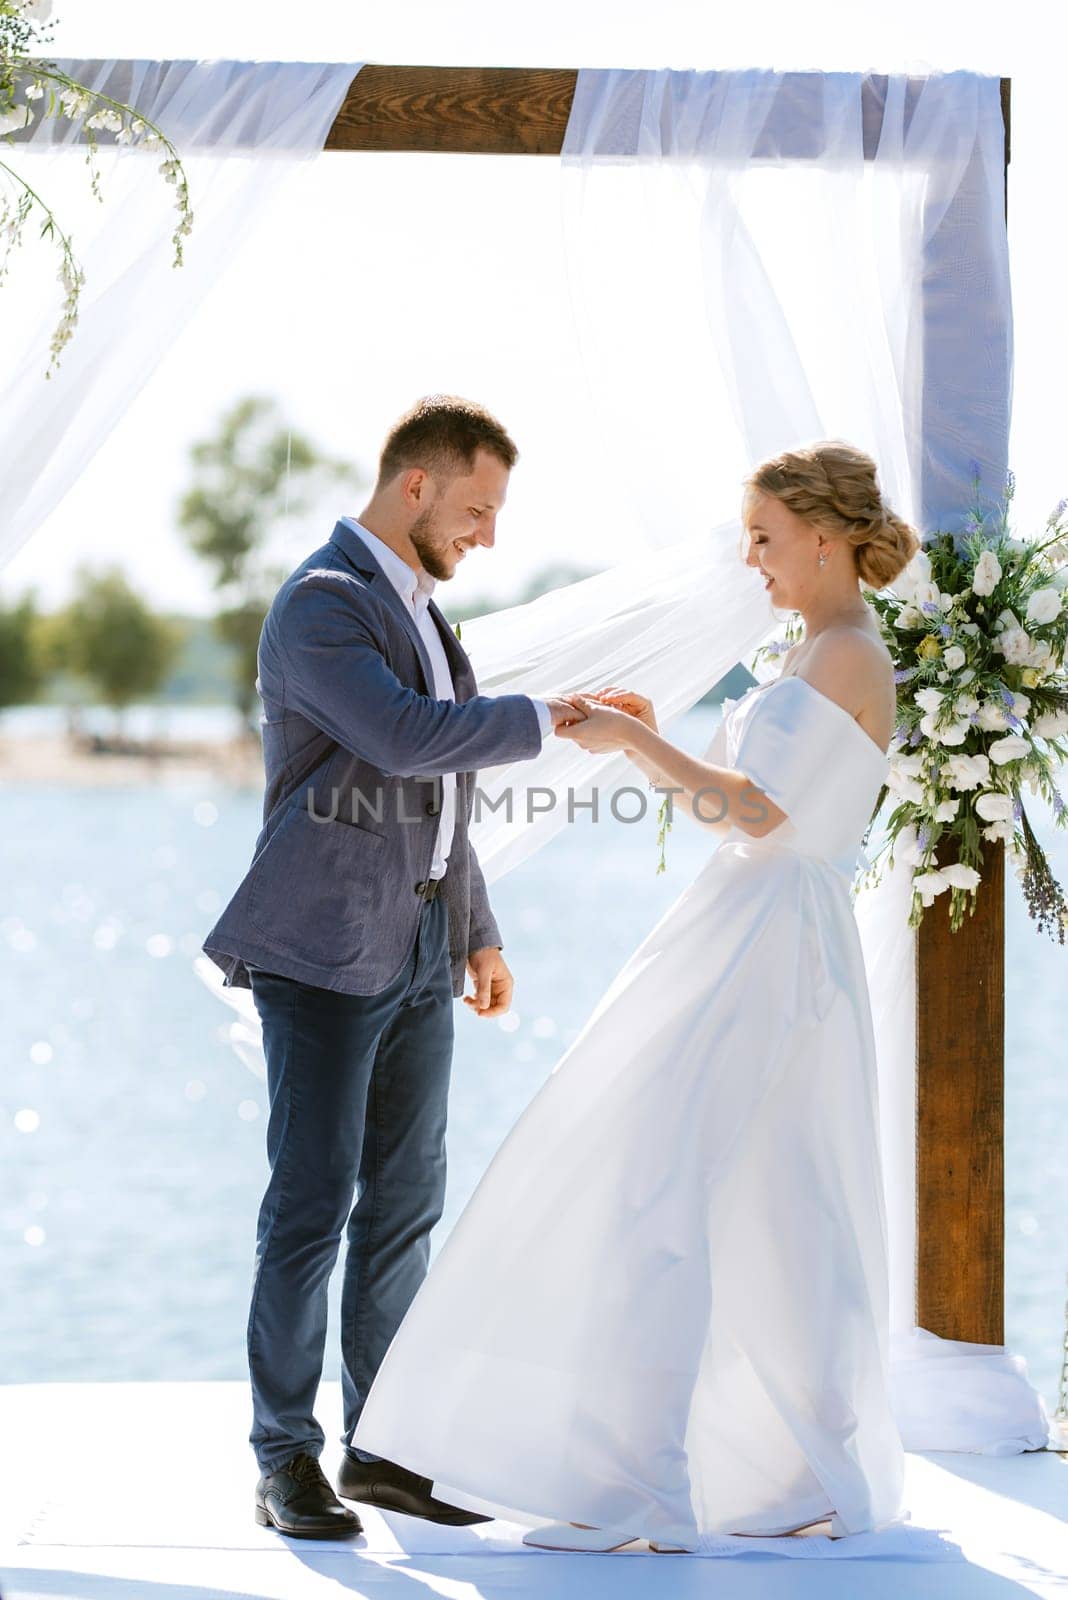 wedding ceremony on a high pier near the river by Andreua